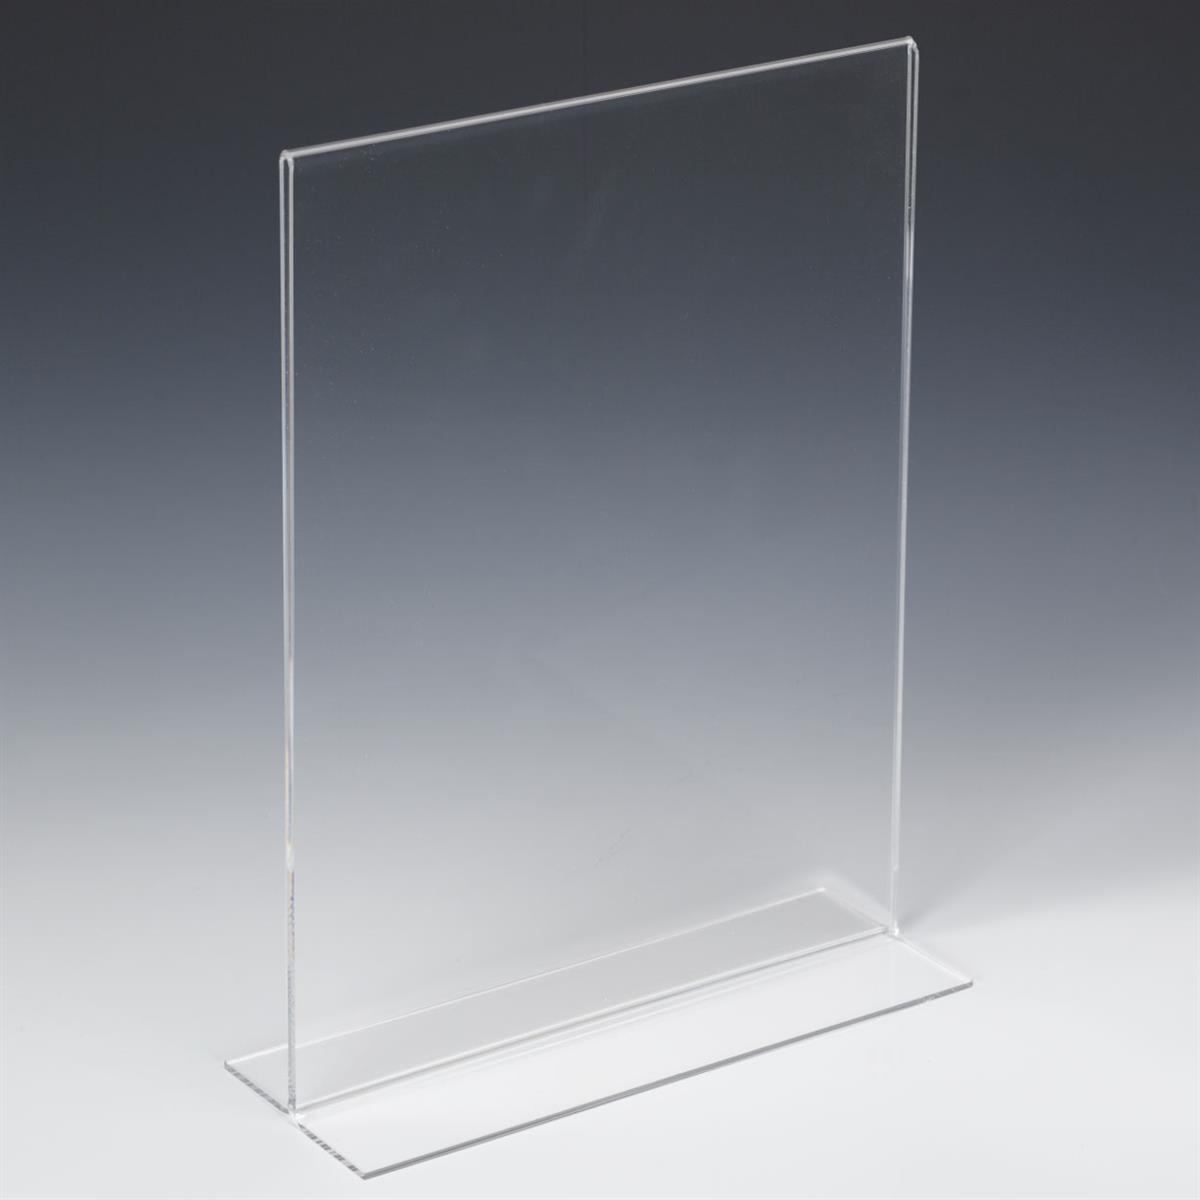 Stand Up Sign Holder Double Sided Landscape A4 Clear